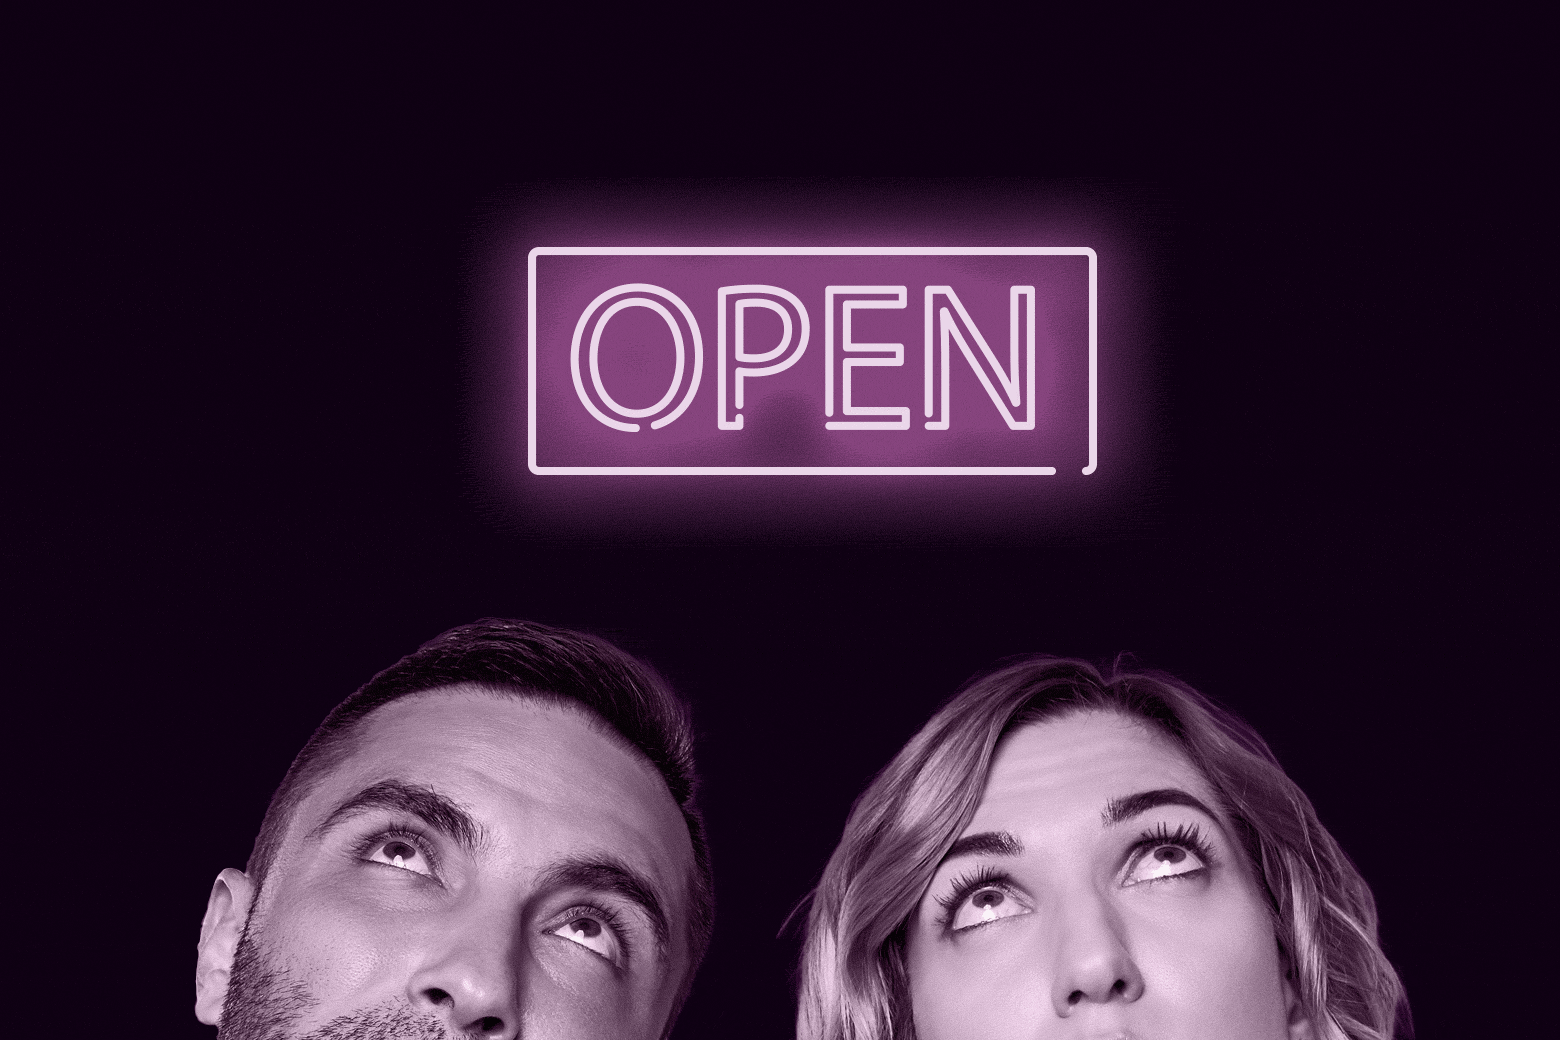 Two people looking up at a sign that says open.